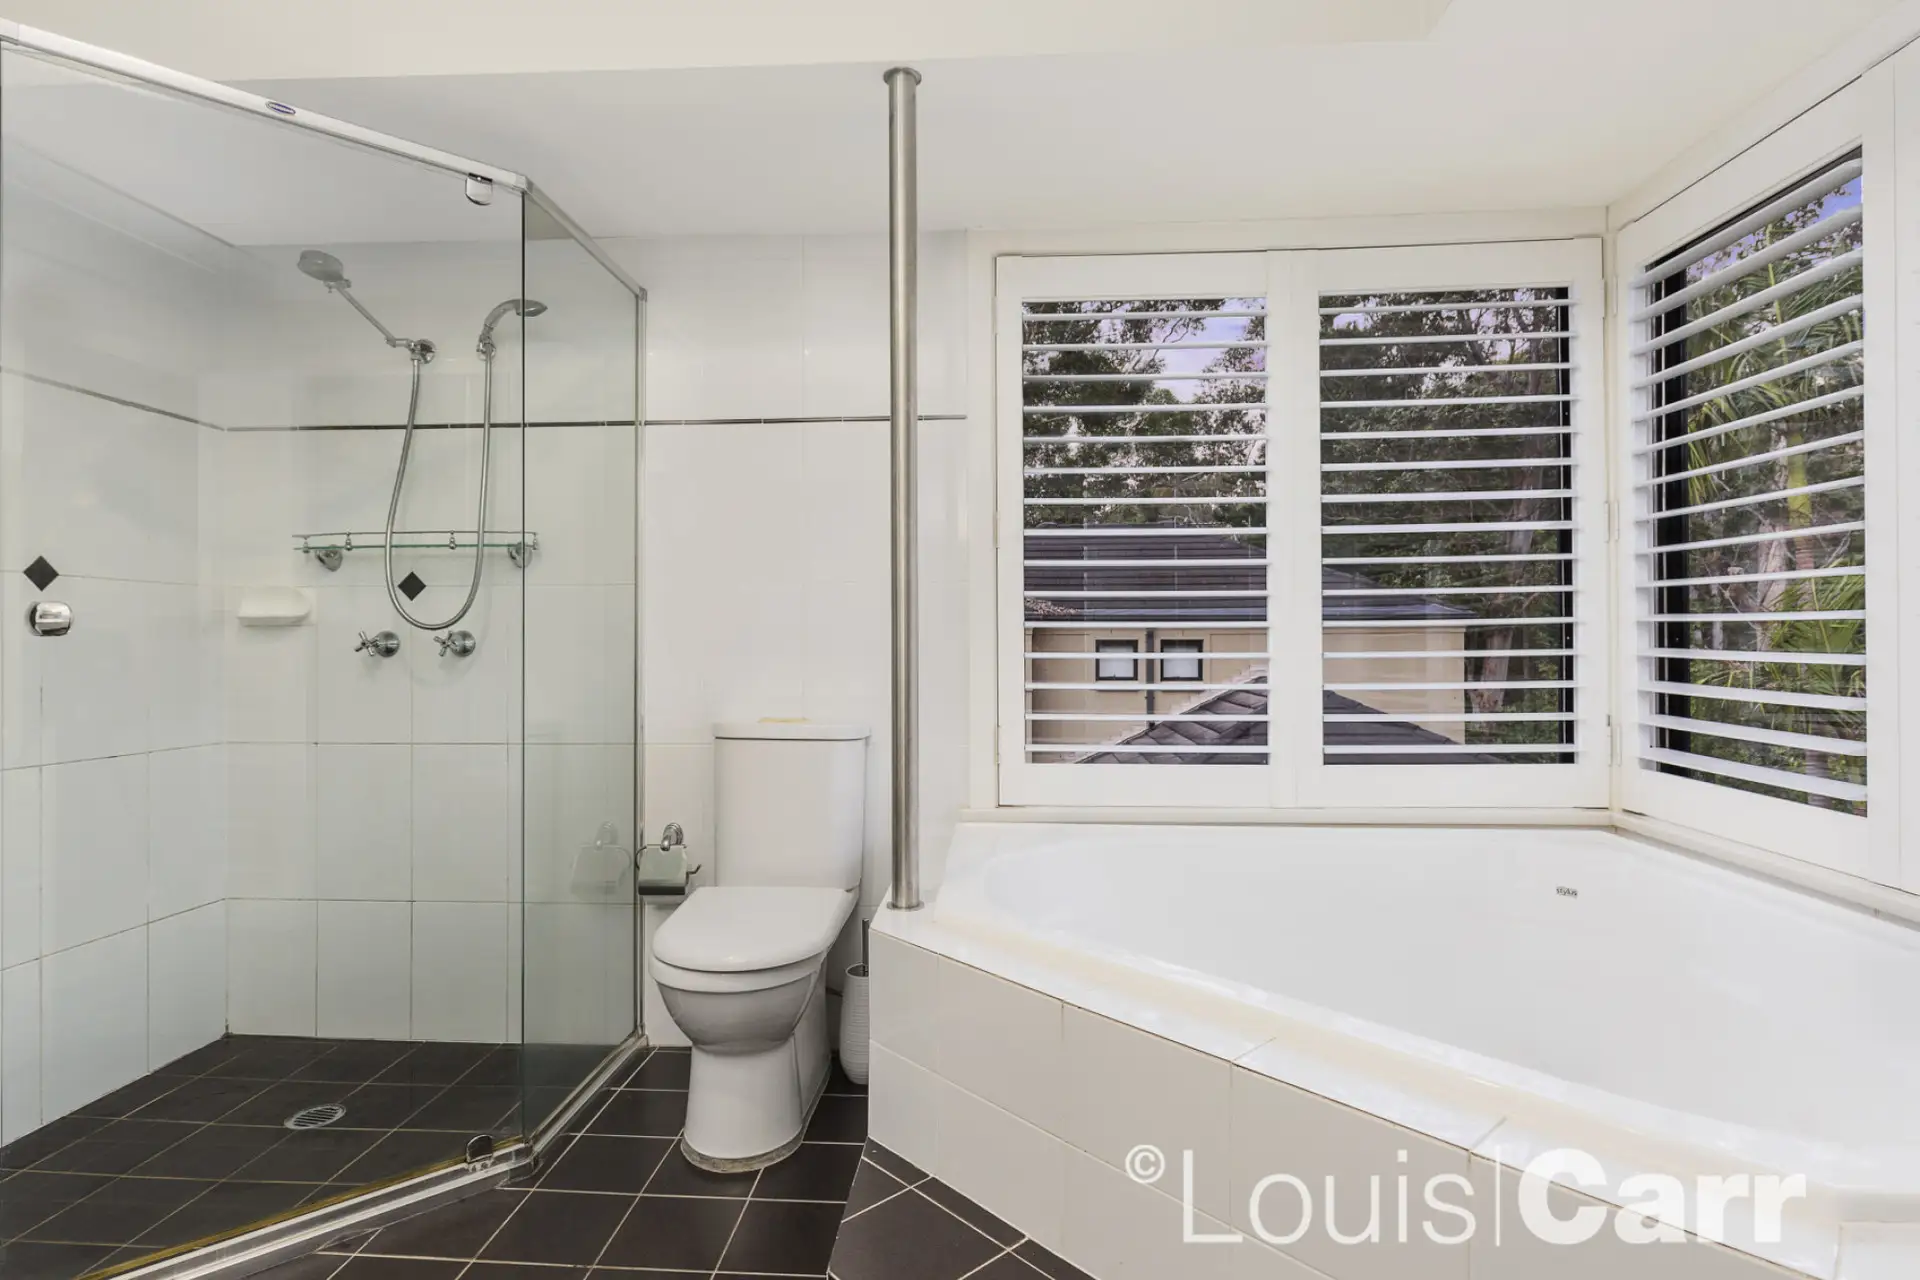 Photo #6: 16 Oliver Way, Cherrybrook - Sold by Louis Carr Real Estate